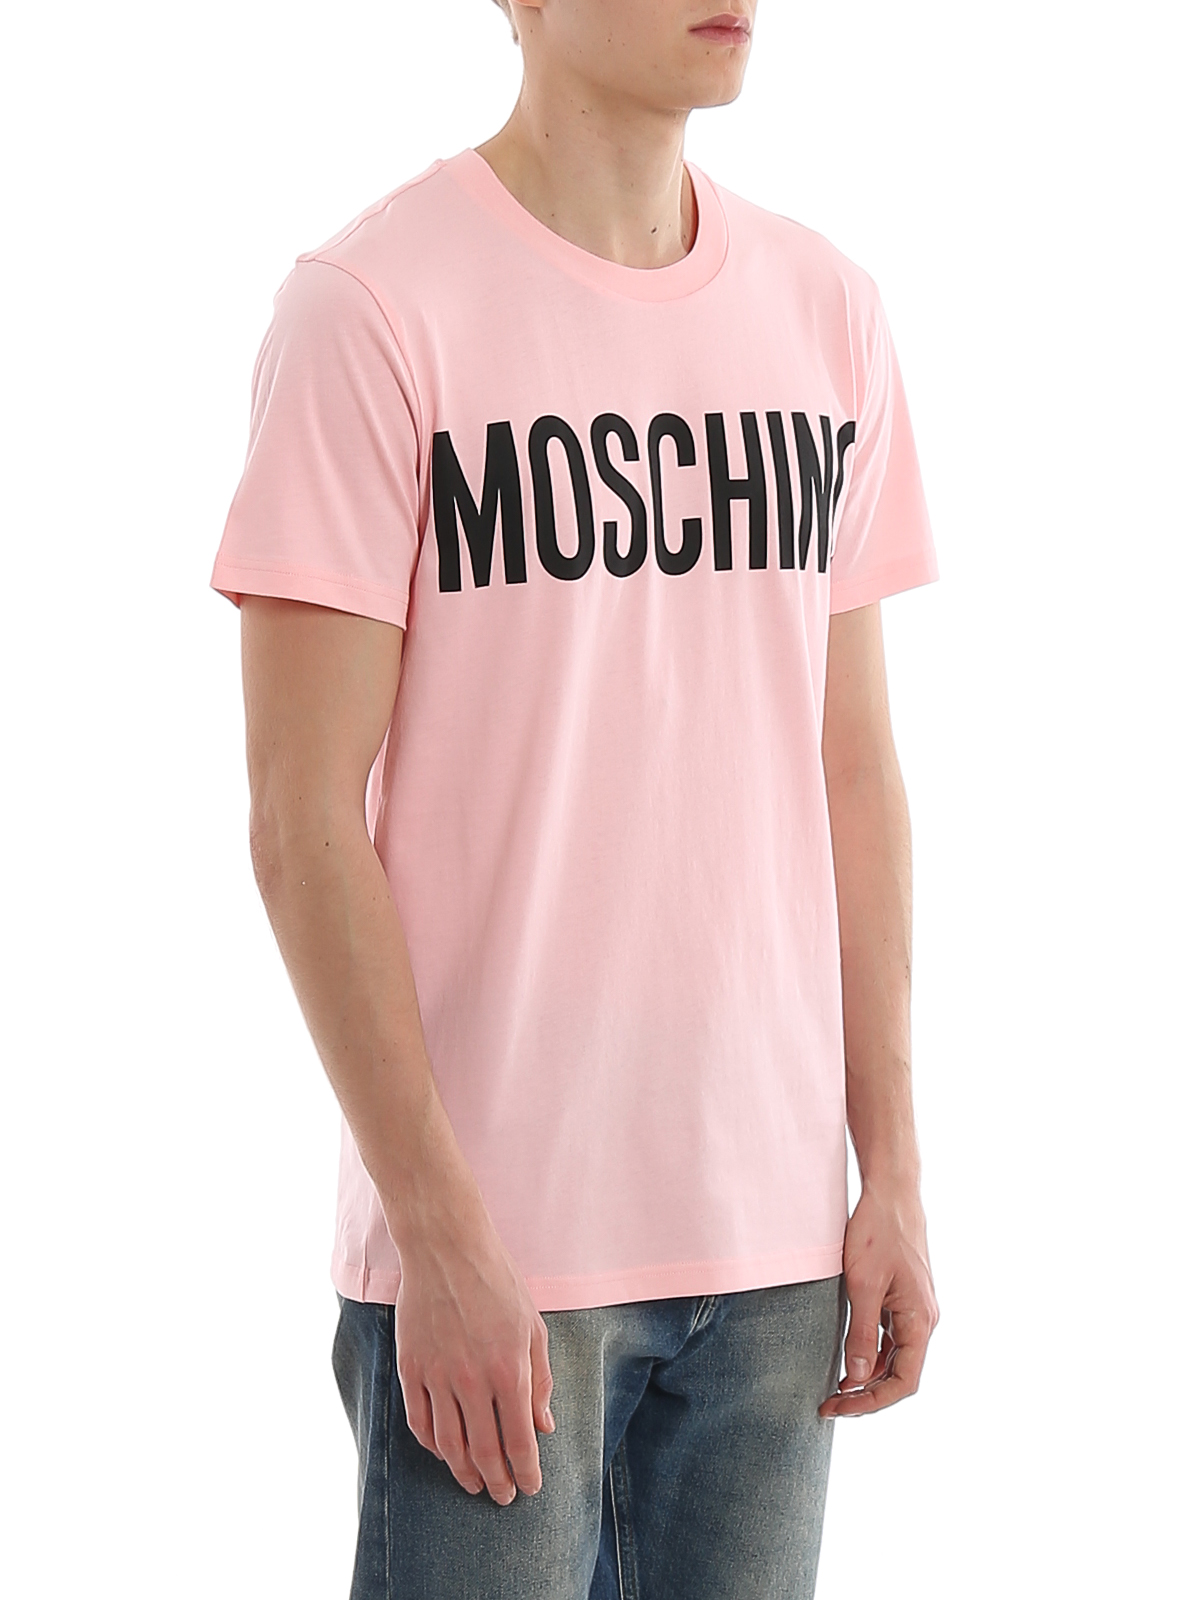 moschino jeans t shirt